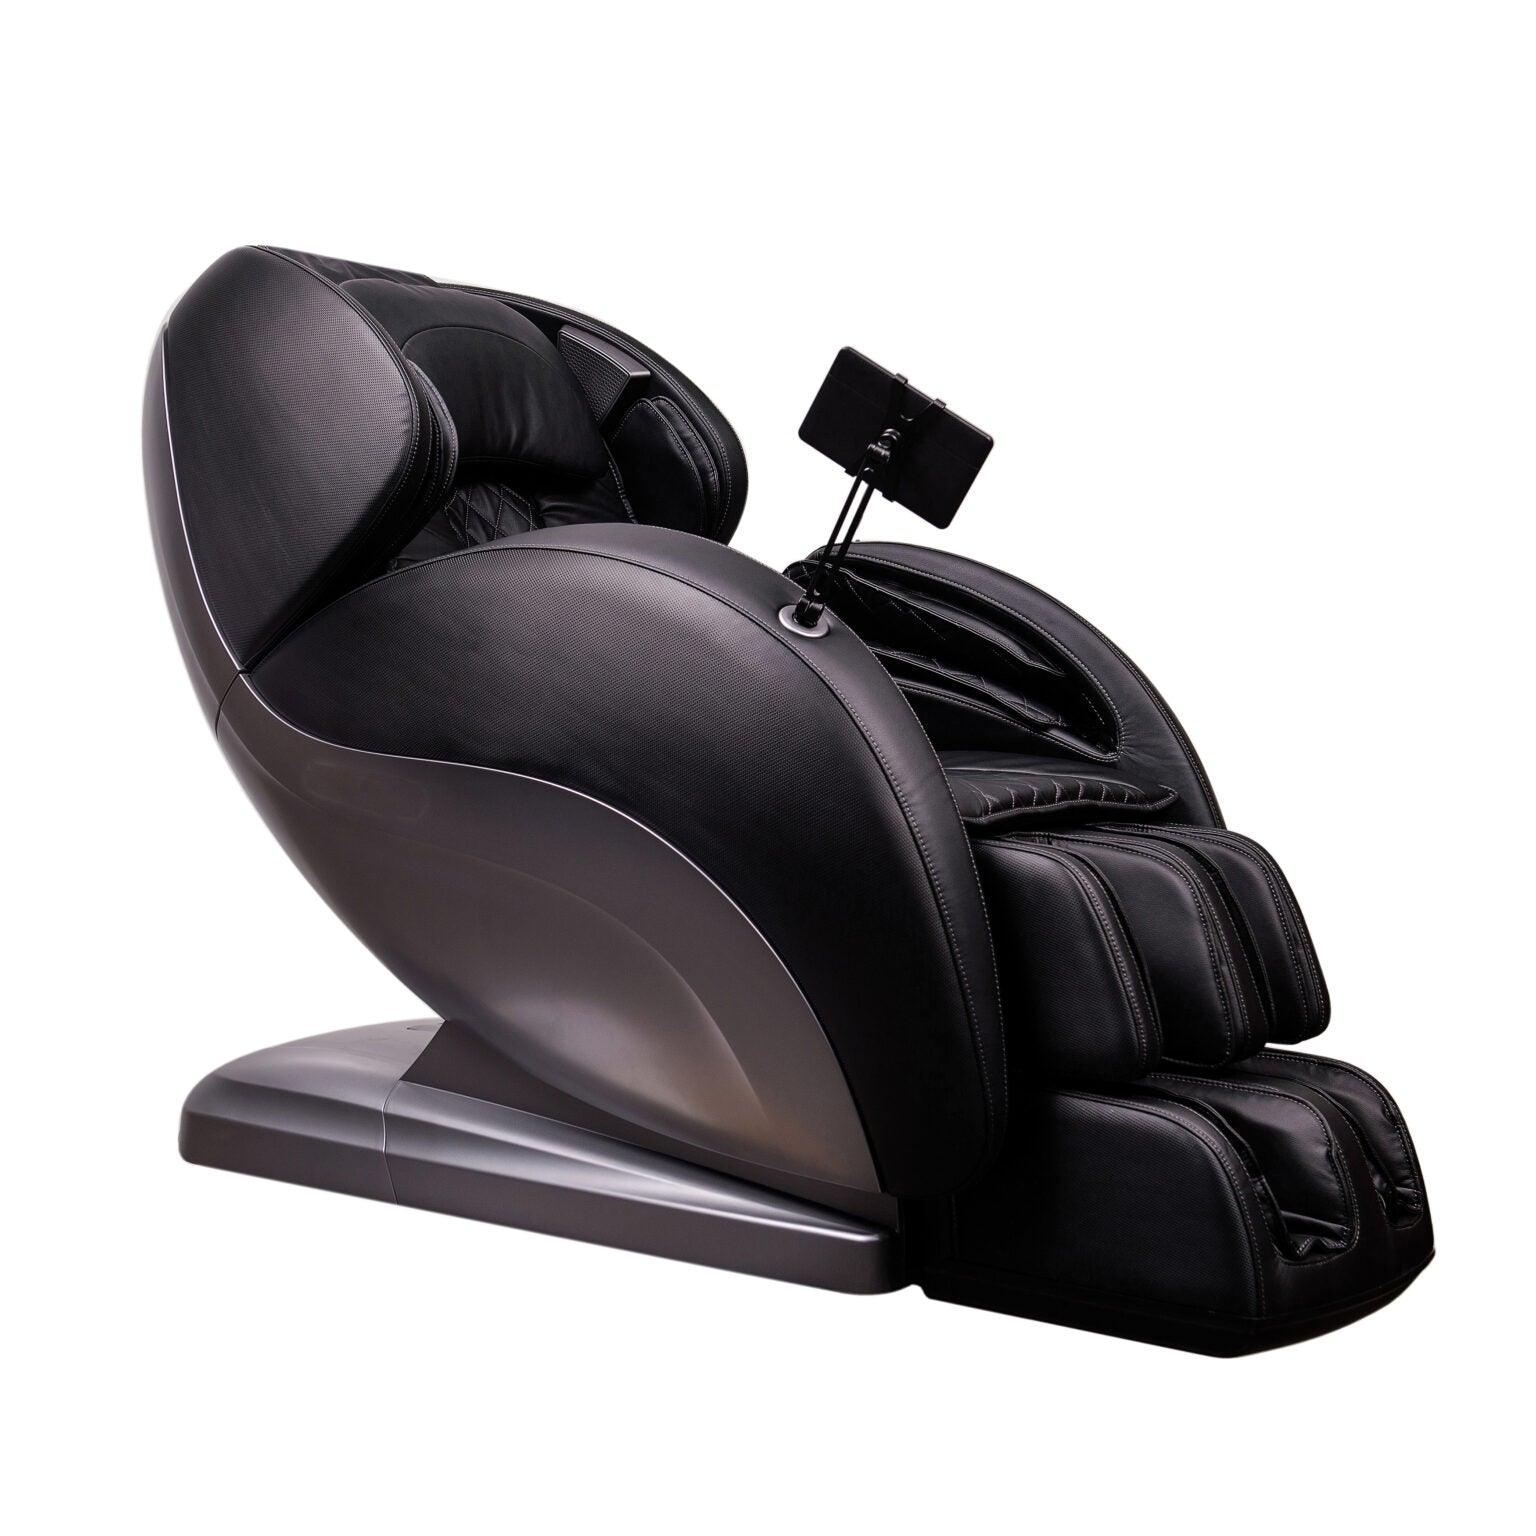 Acer Advanced 3D Massage Chair with Internet Access!